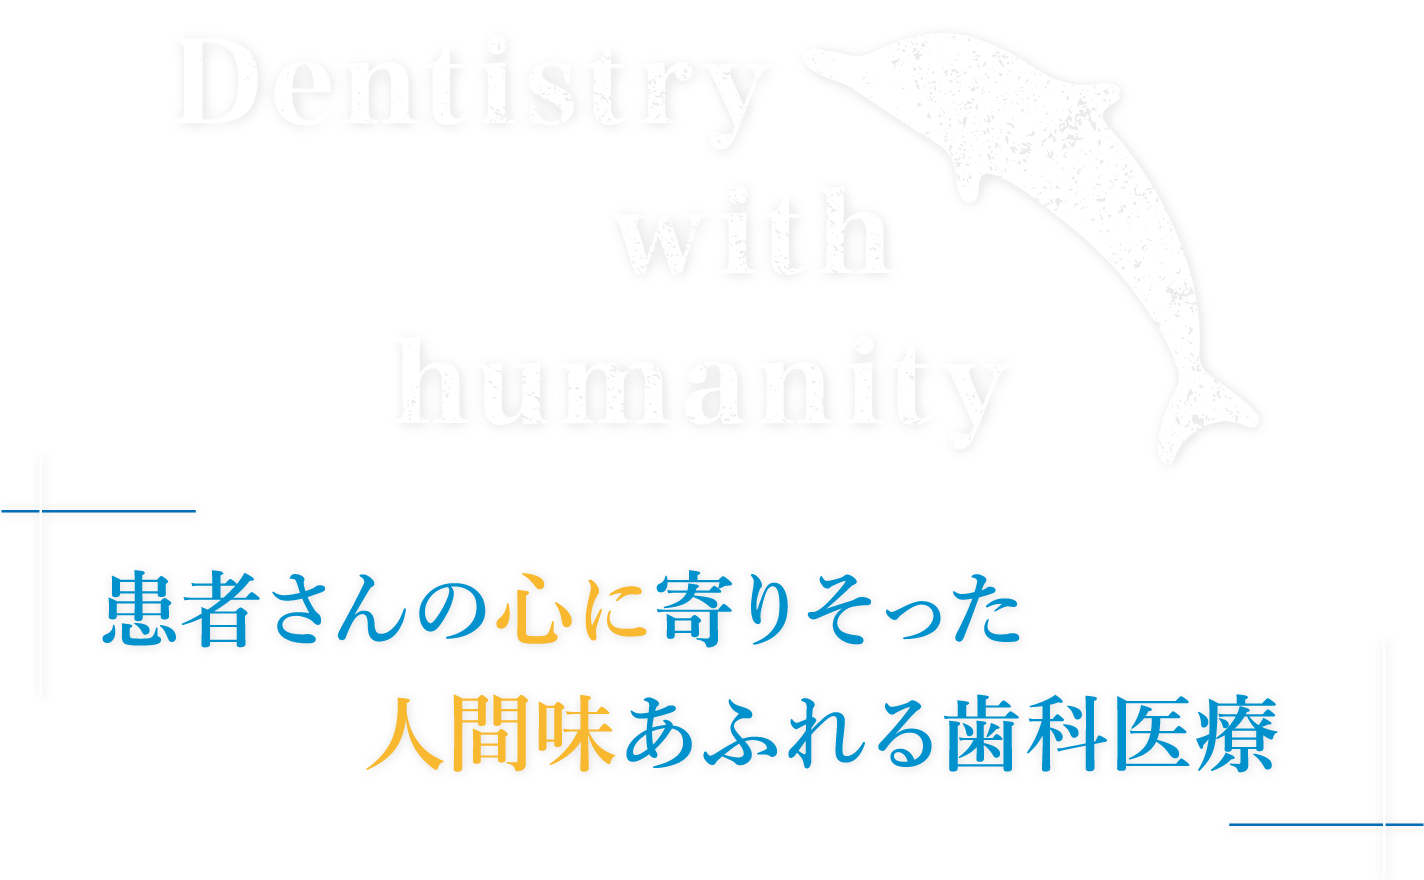 Dentistry with humanity